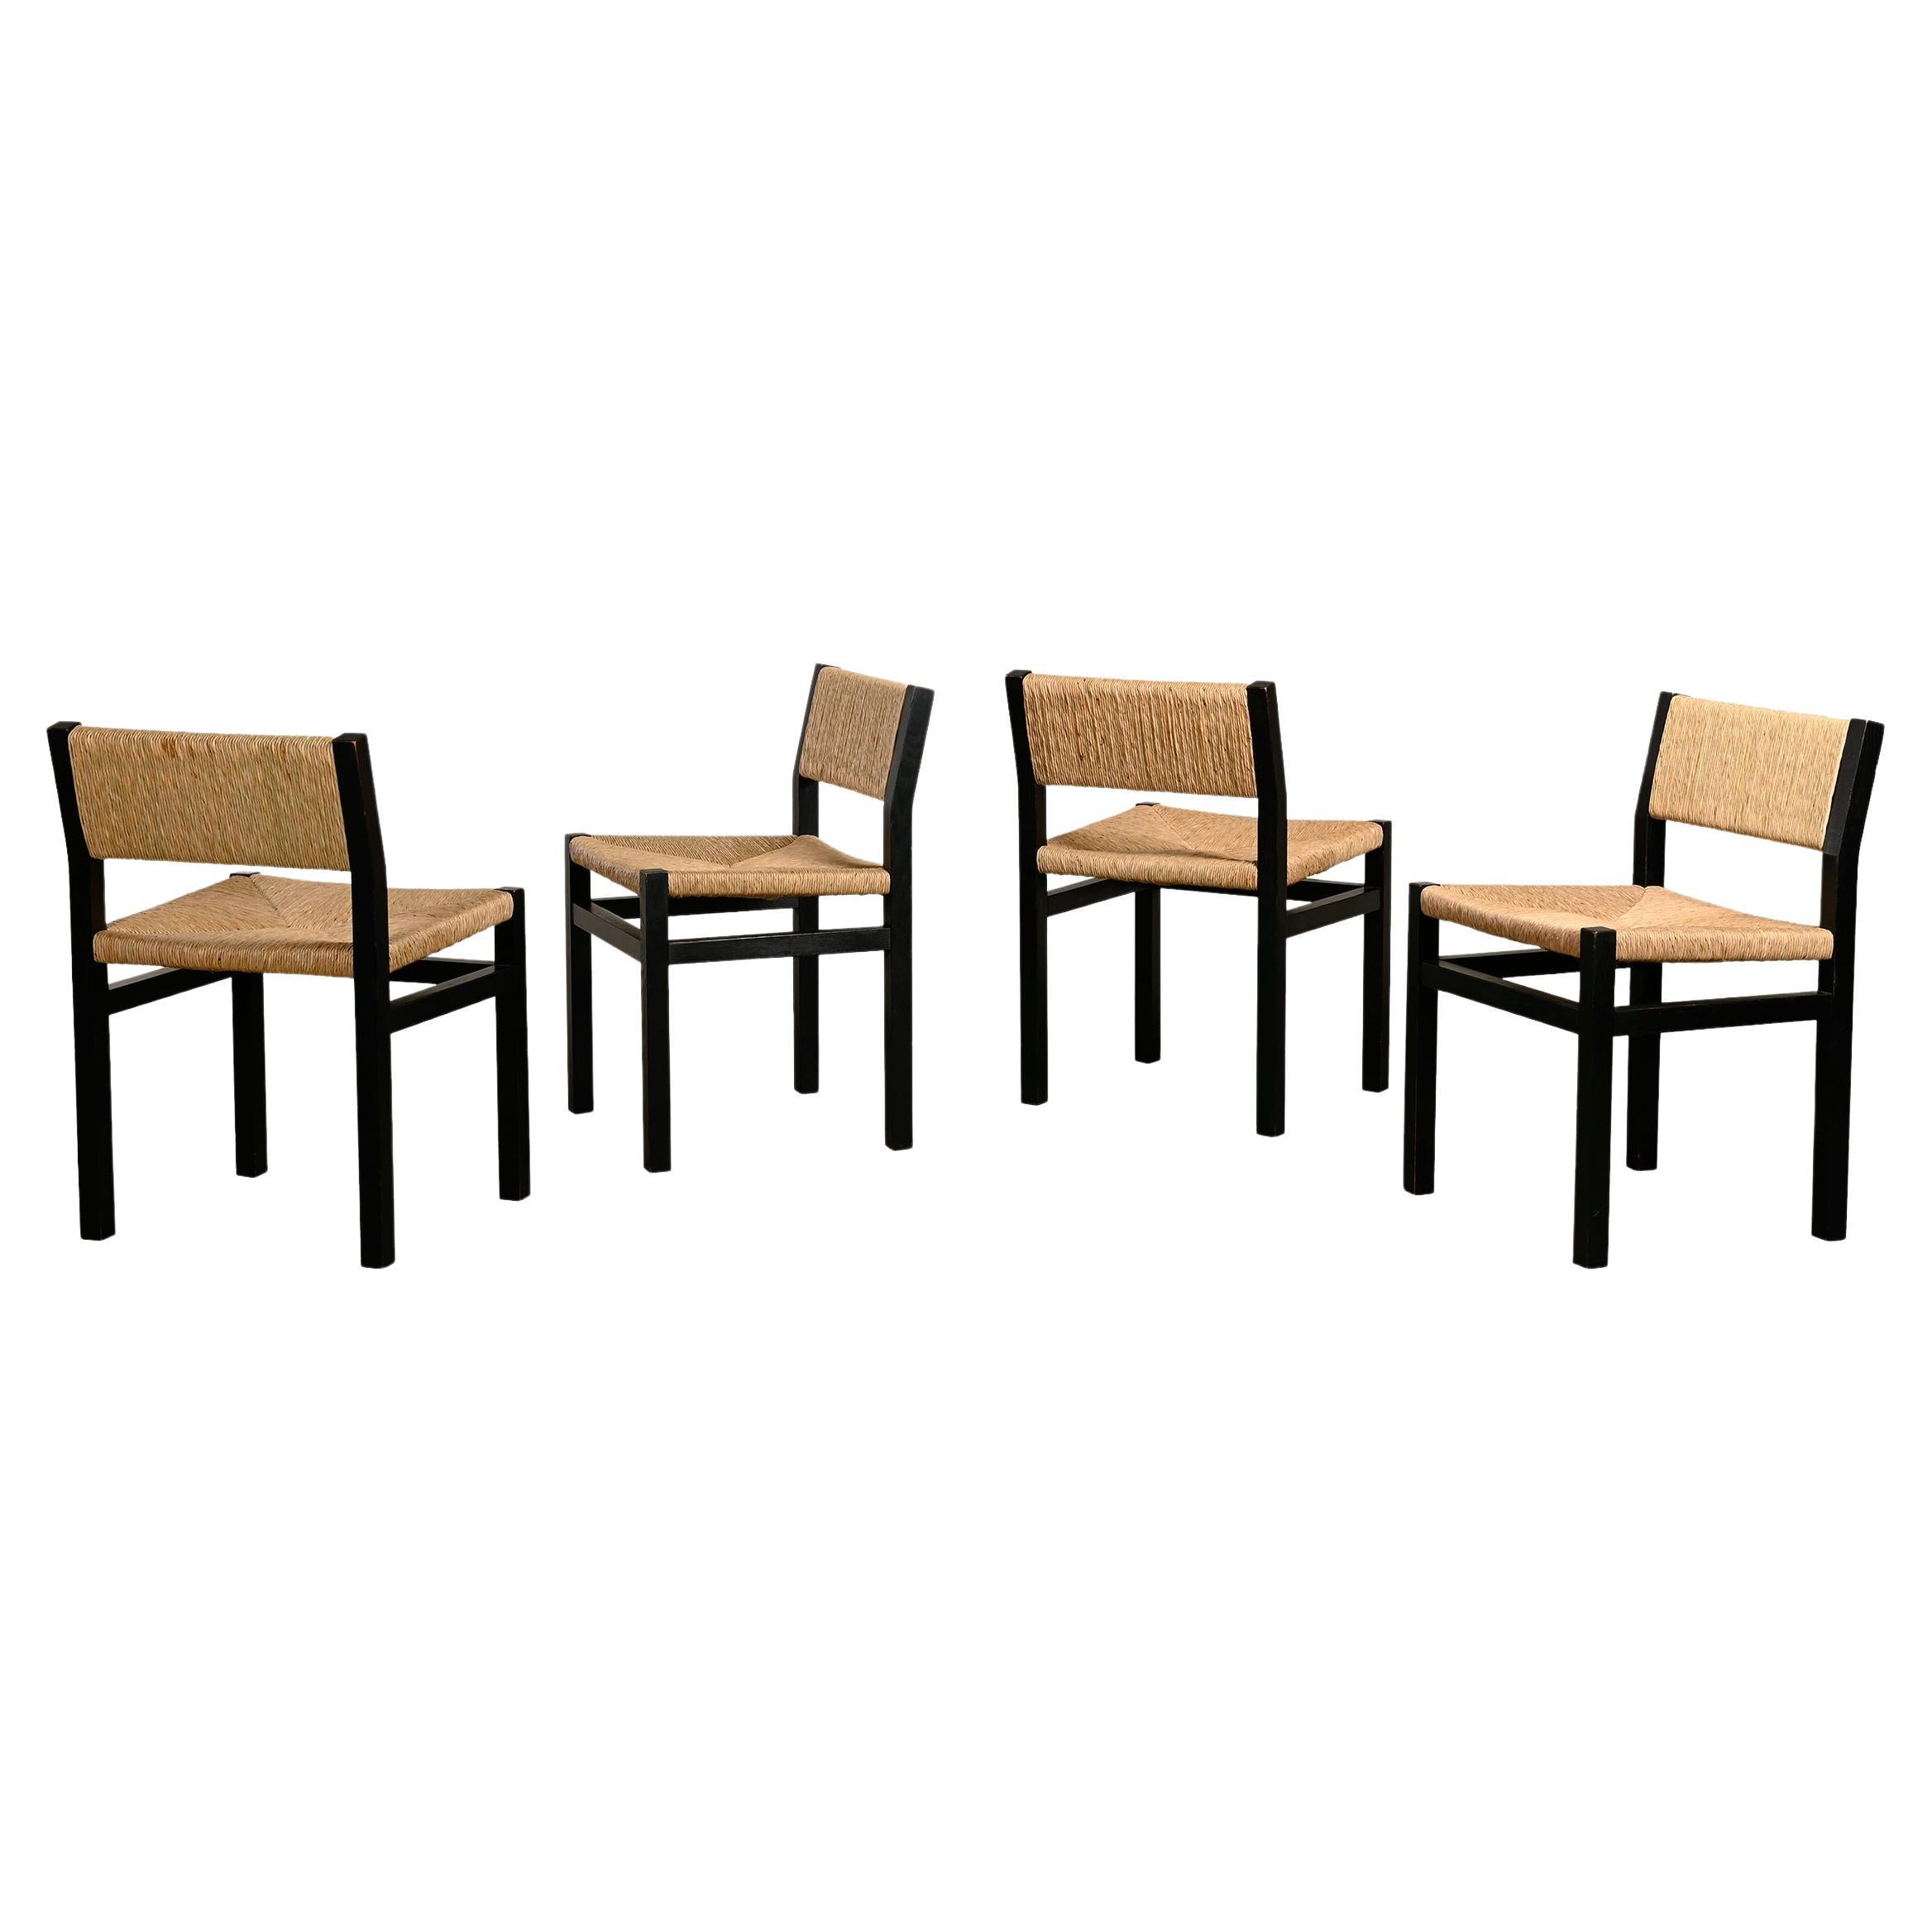 Martin Visser SE82 Chairs in Black Wood and hand woven Rush Seats for Spectrum For Sale